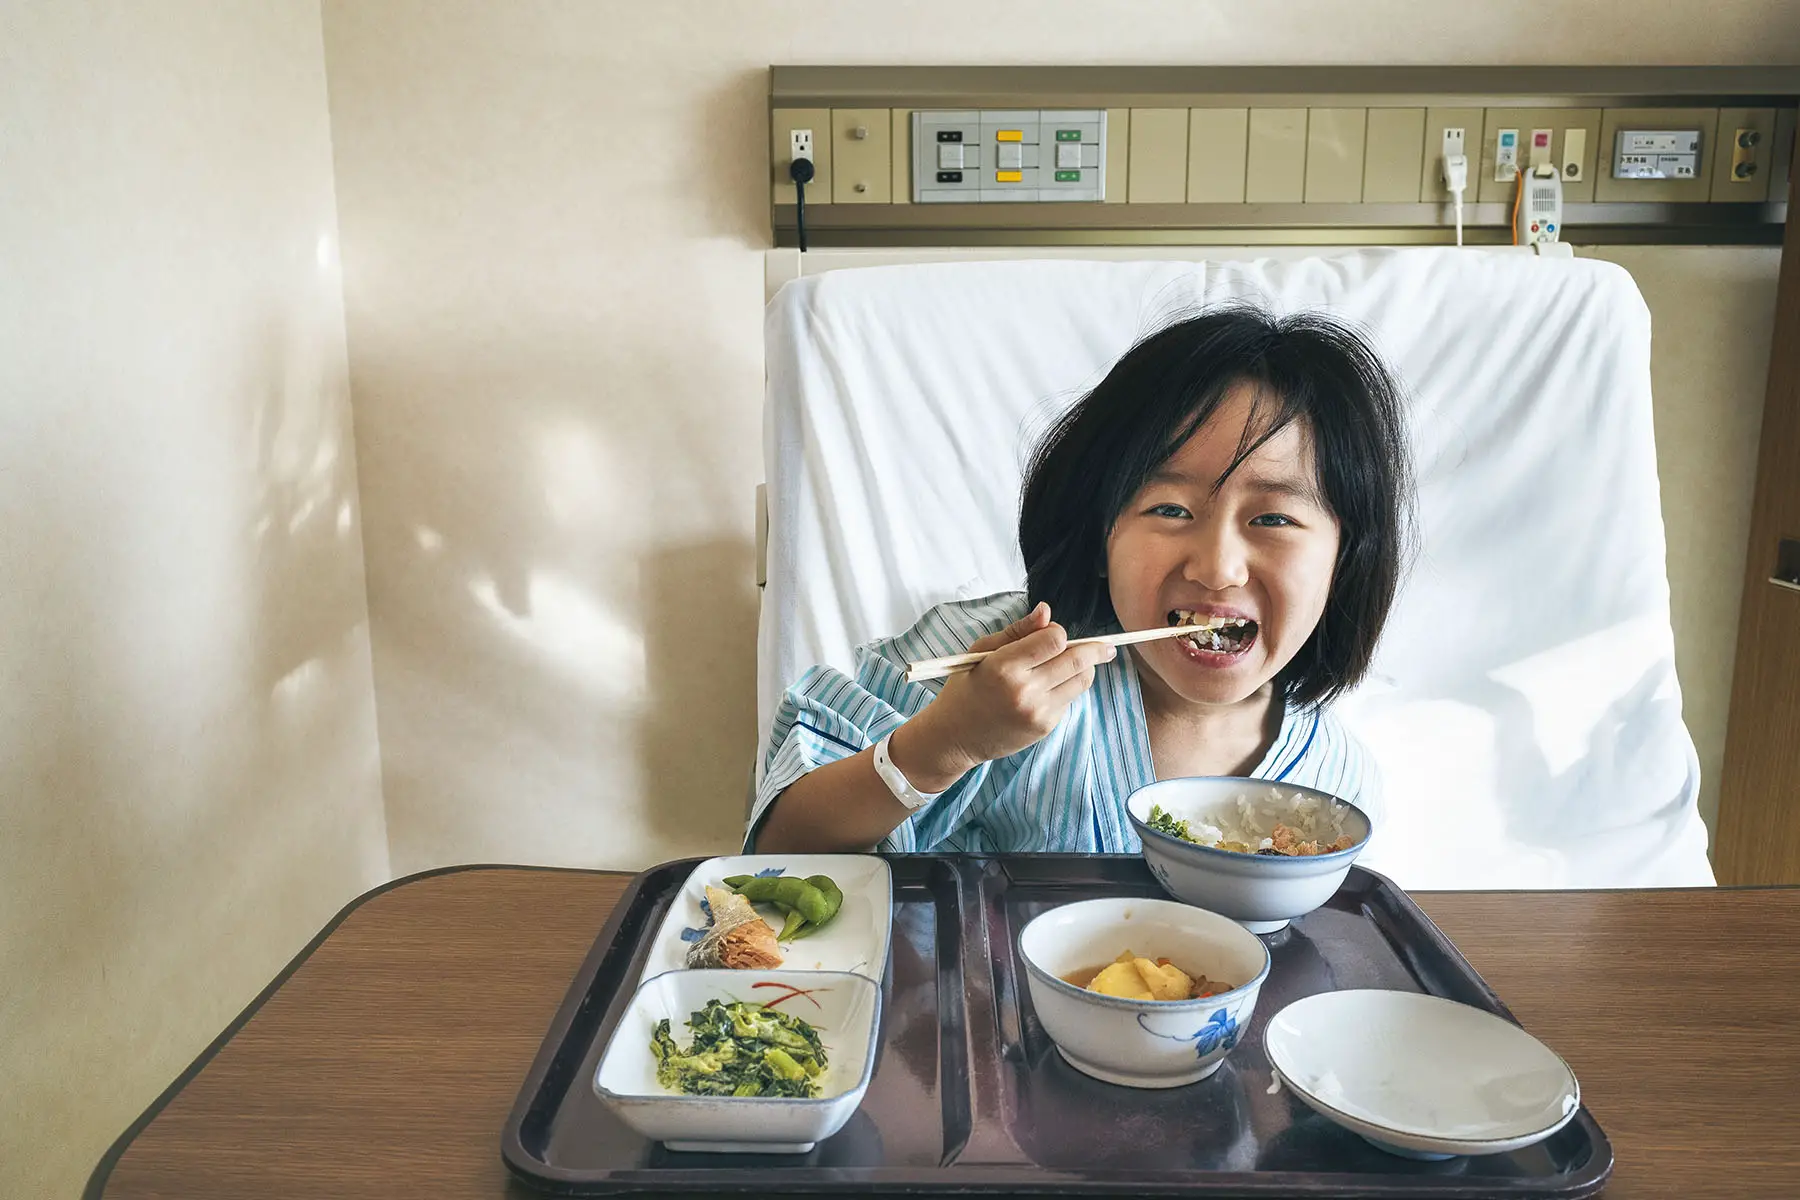 Little girl eating in her hospital bet, looking adorable.